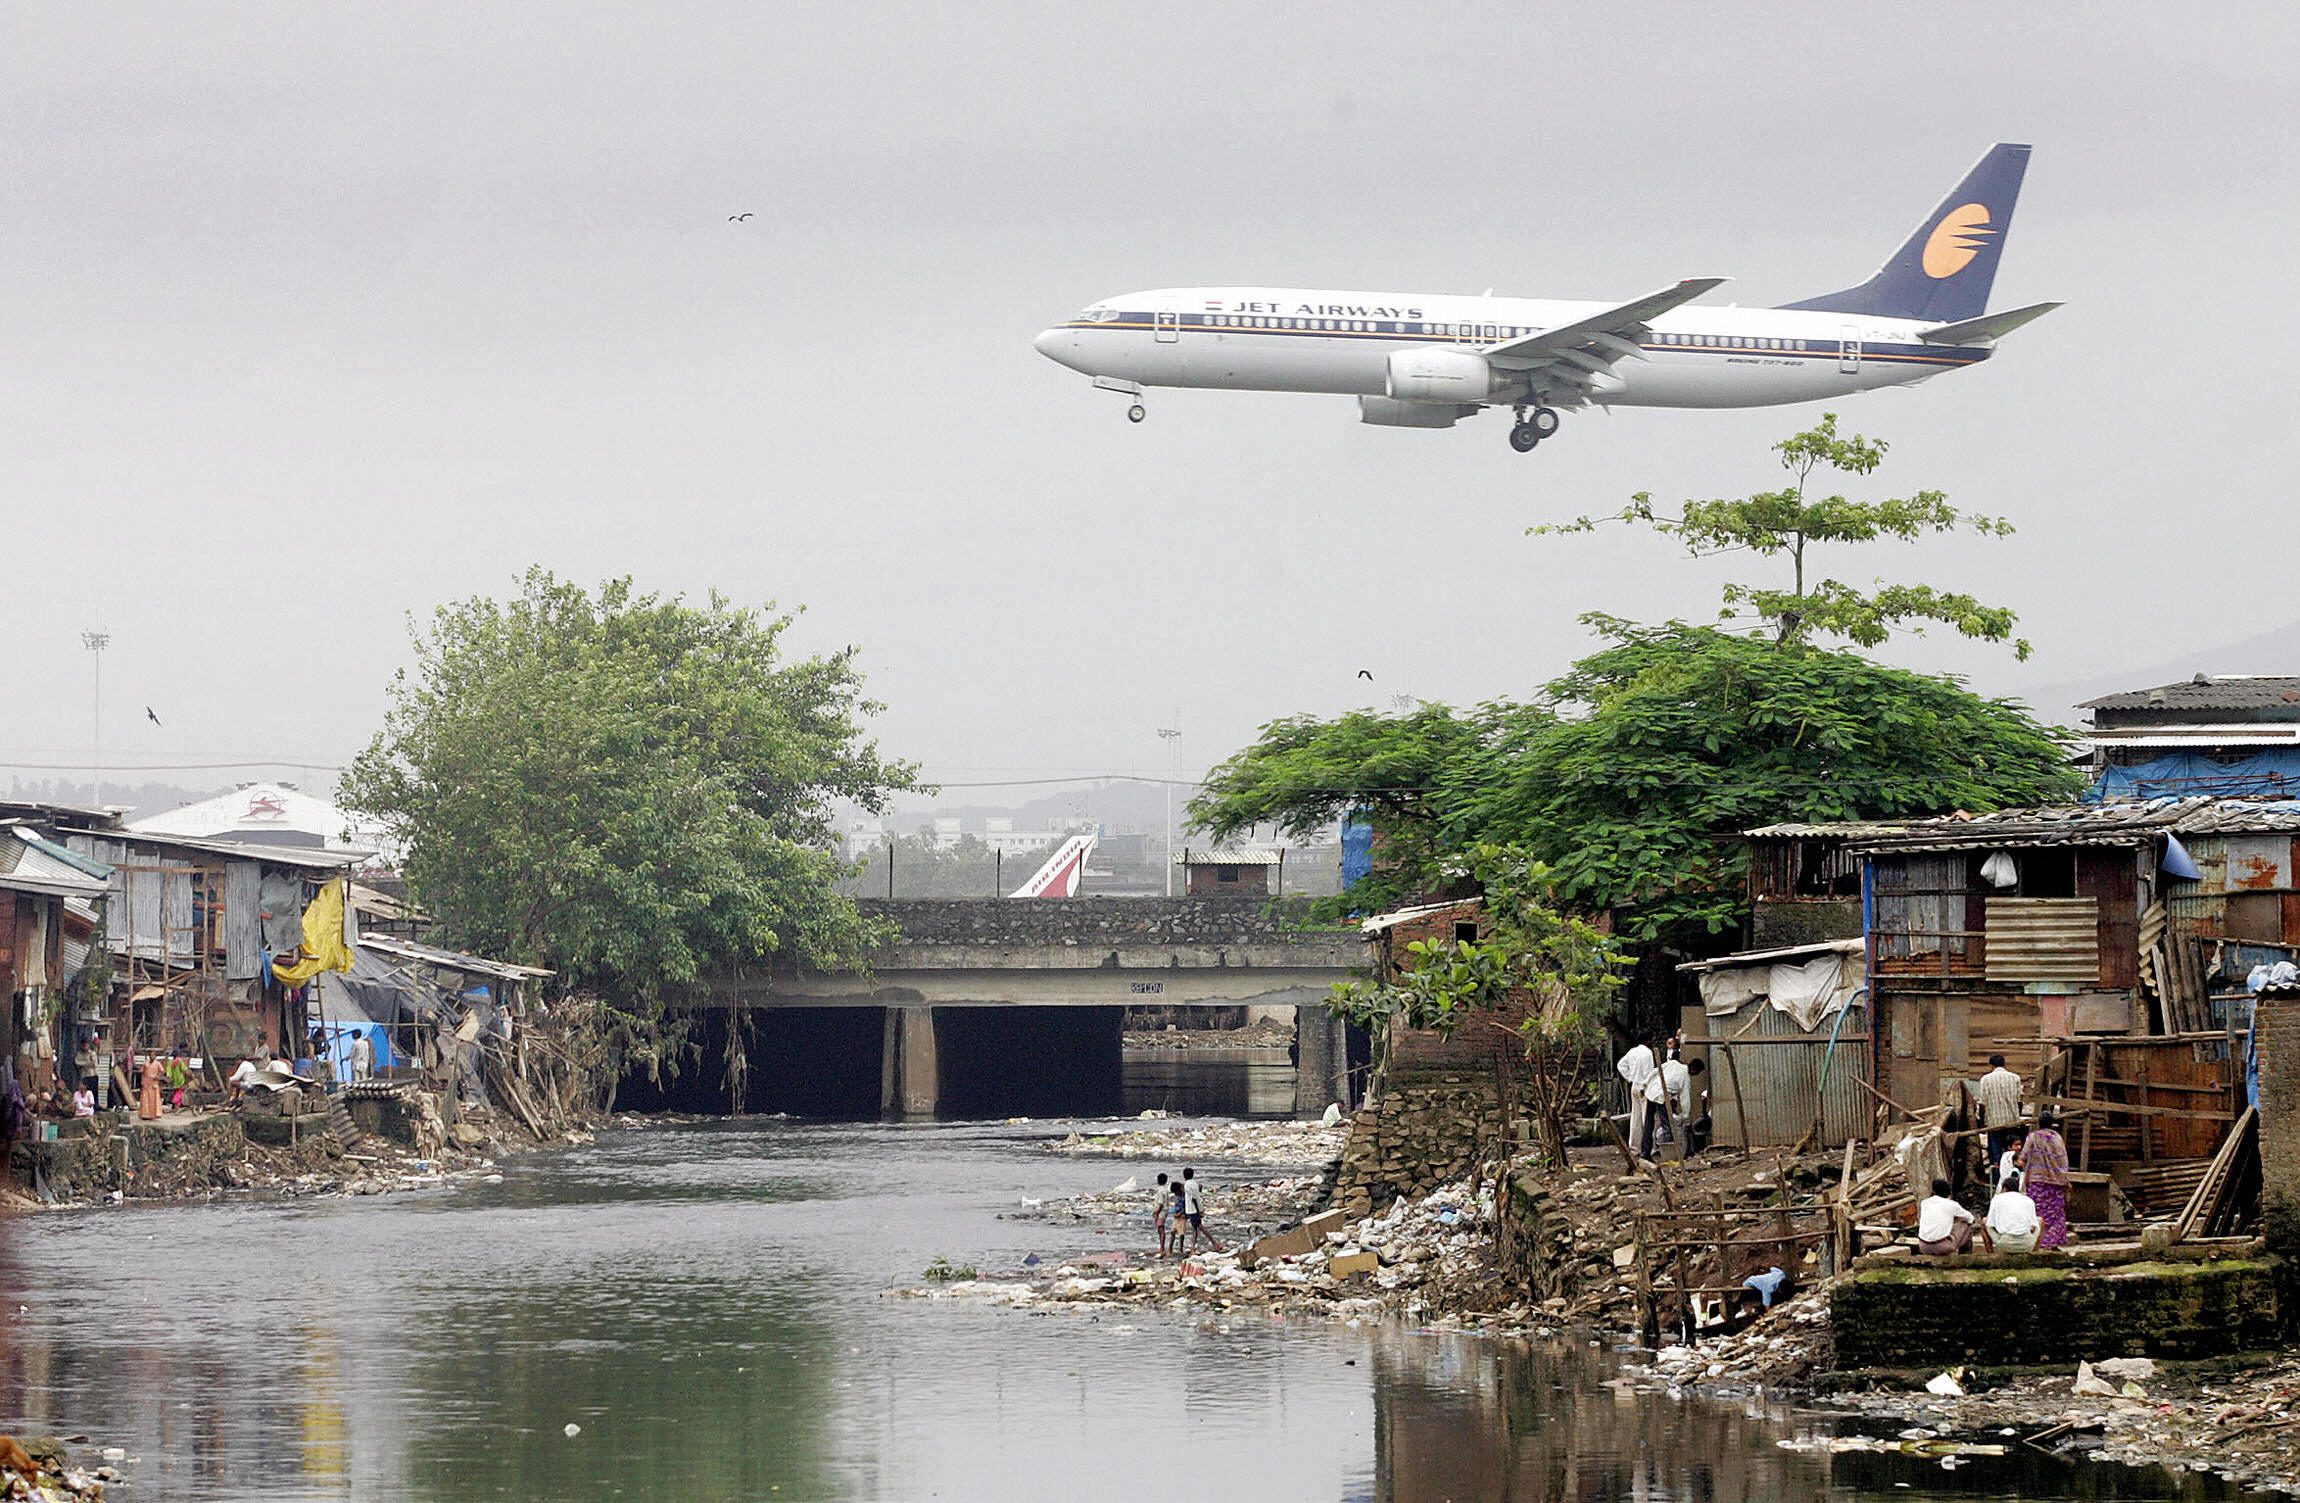 PHOTO: A Jet Airways plane flies over the Mithi River on its way to landing at Mumbai airport, at Bharat Nagar, Aug. 16, 2005 in Hyderabad, India.  